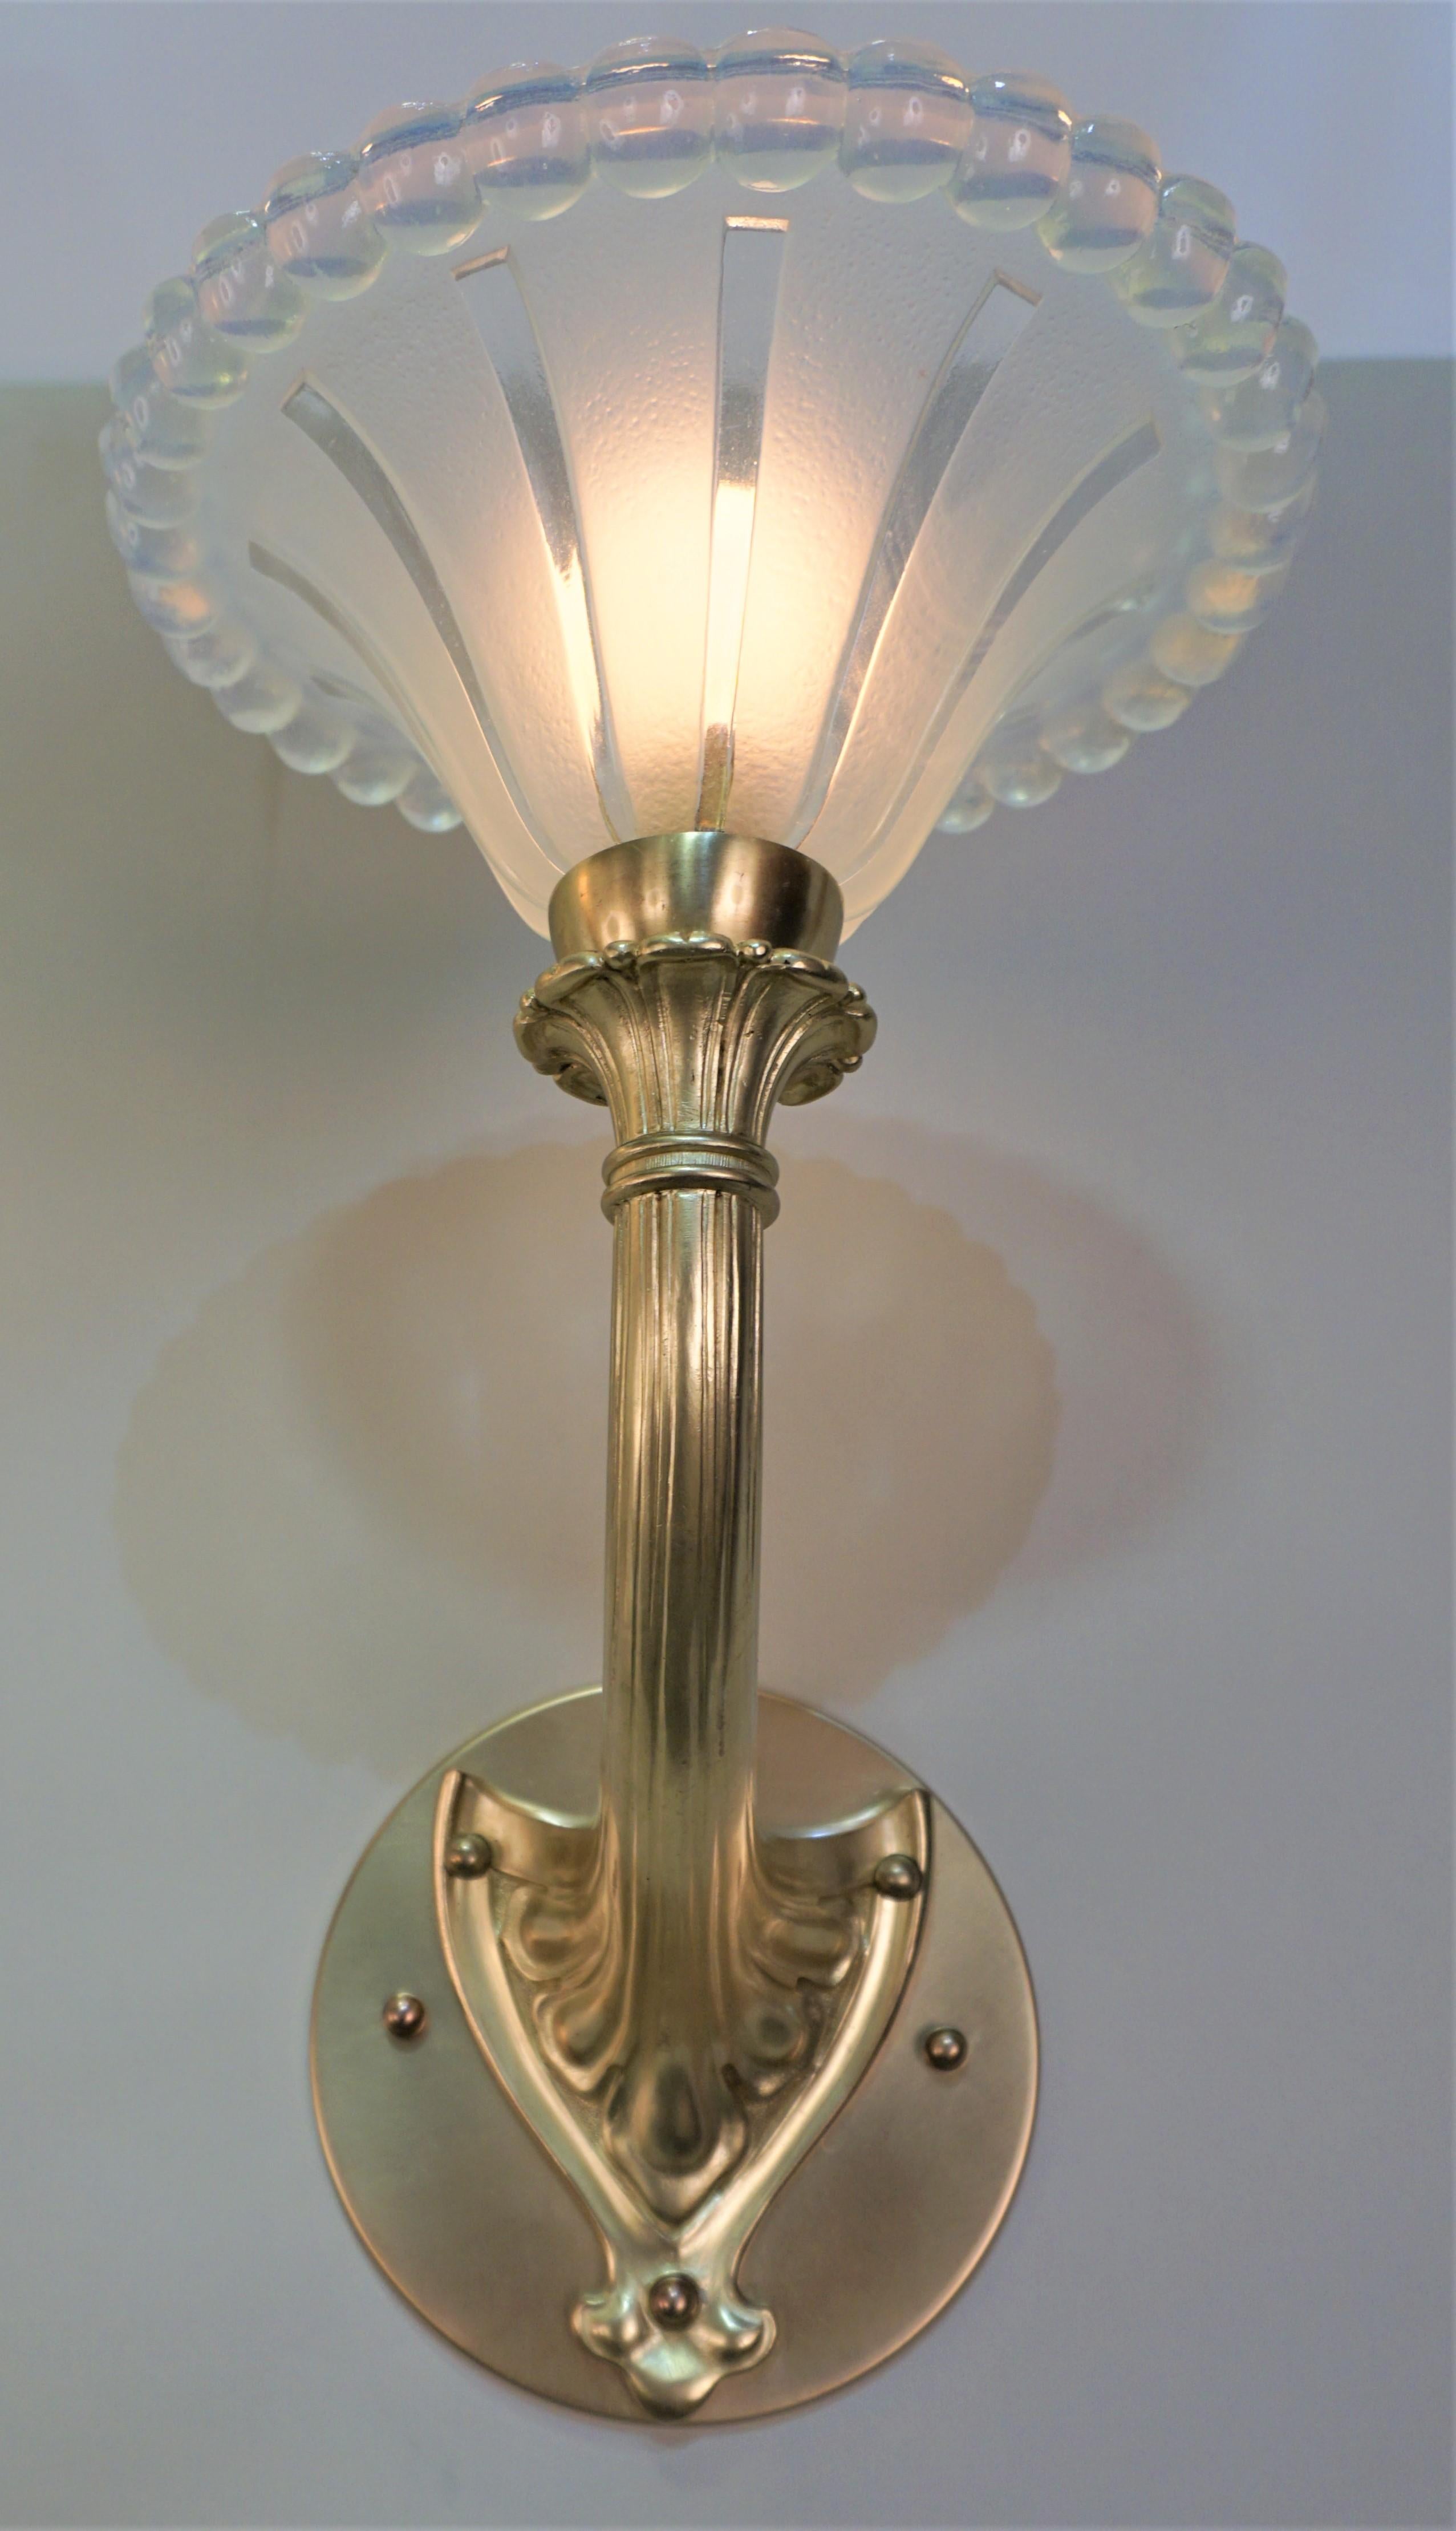 Pair of 1930's art deco bronze wall sconces with clear frost opaline glass (light honey blue) wall sconces
Back plat is 6